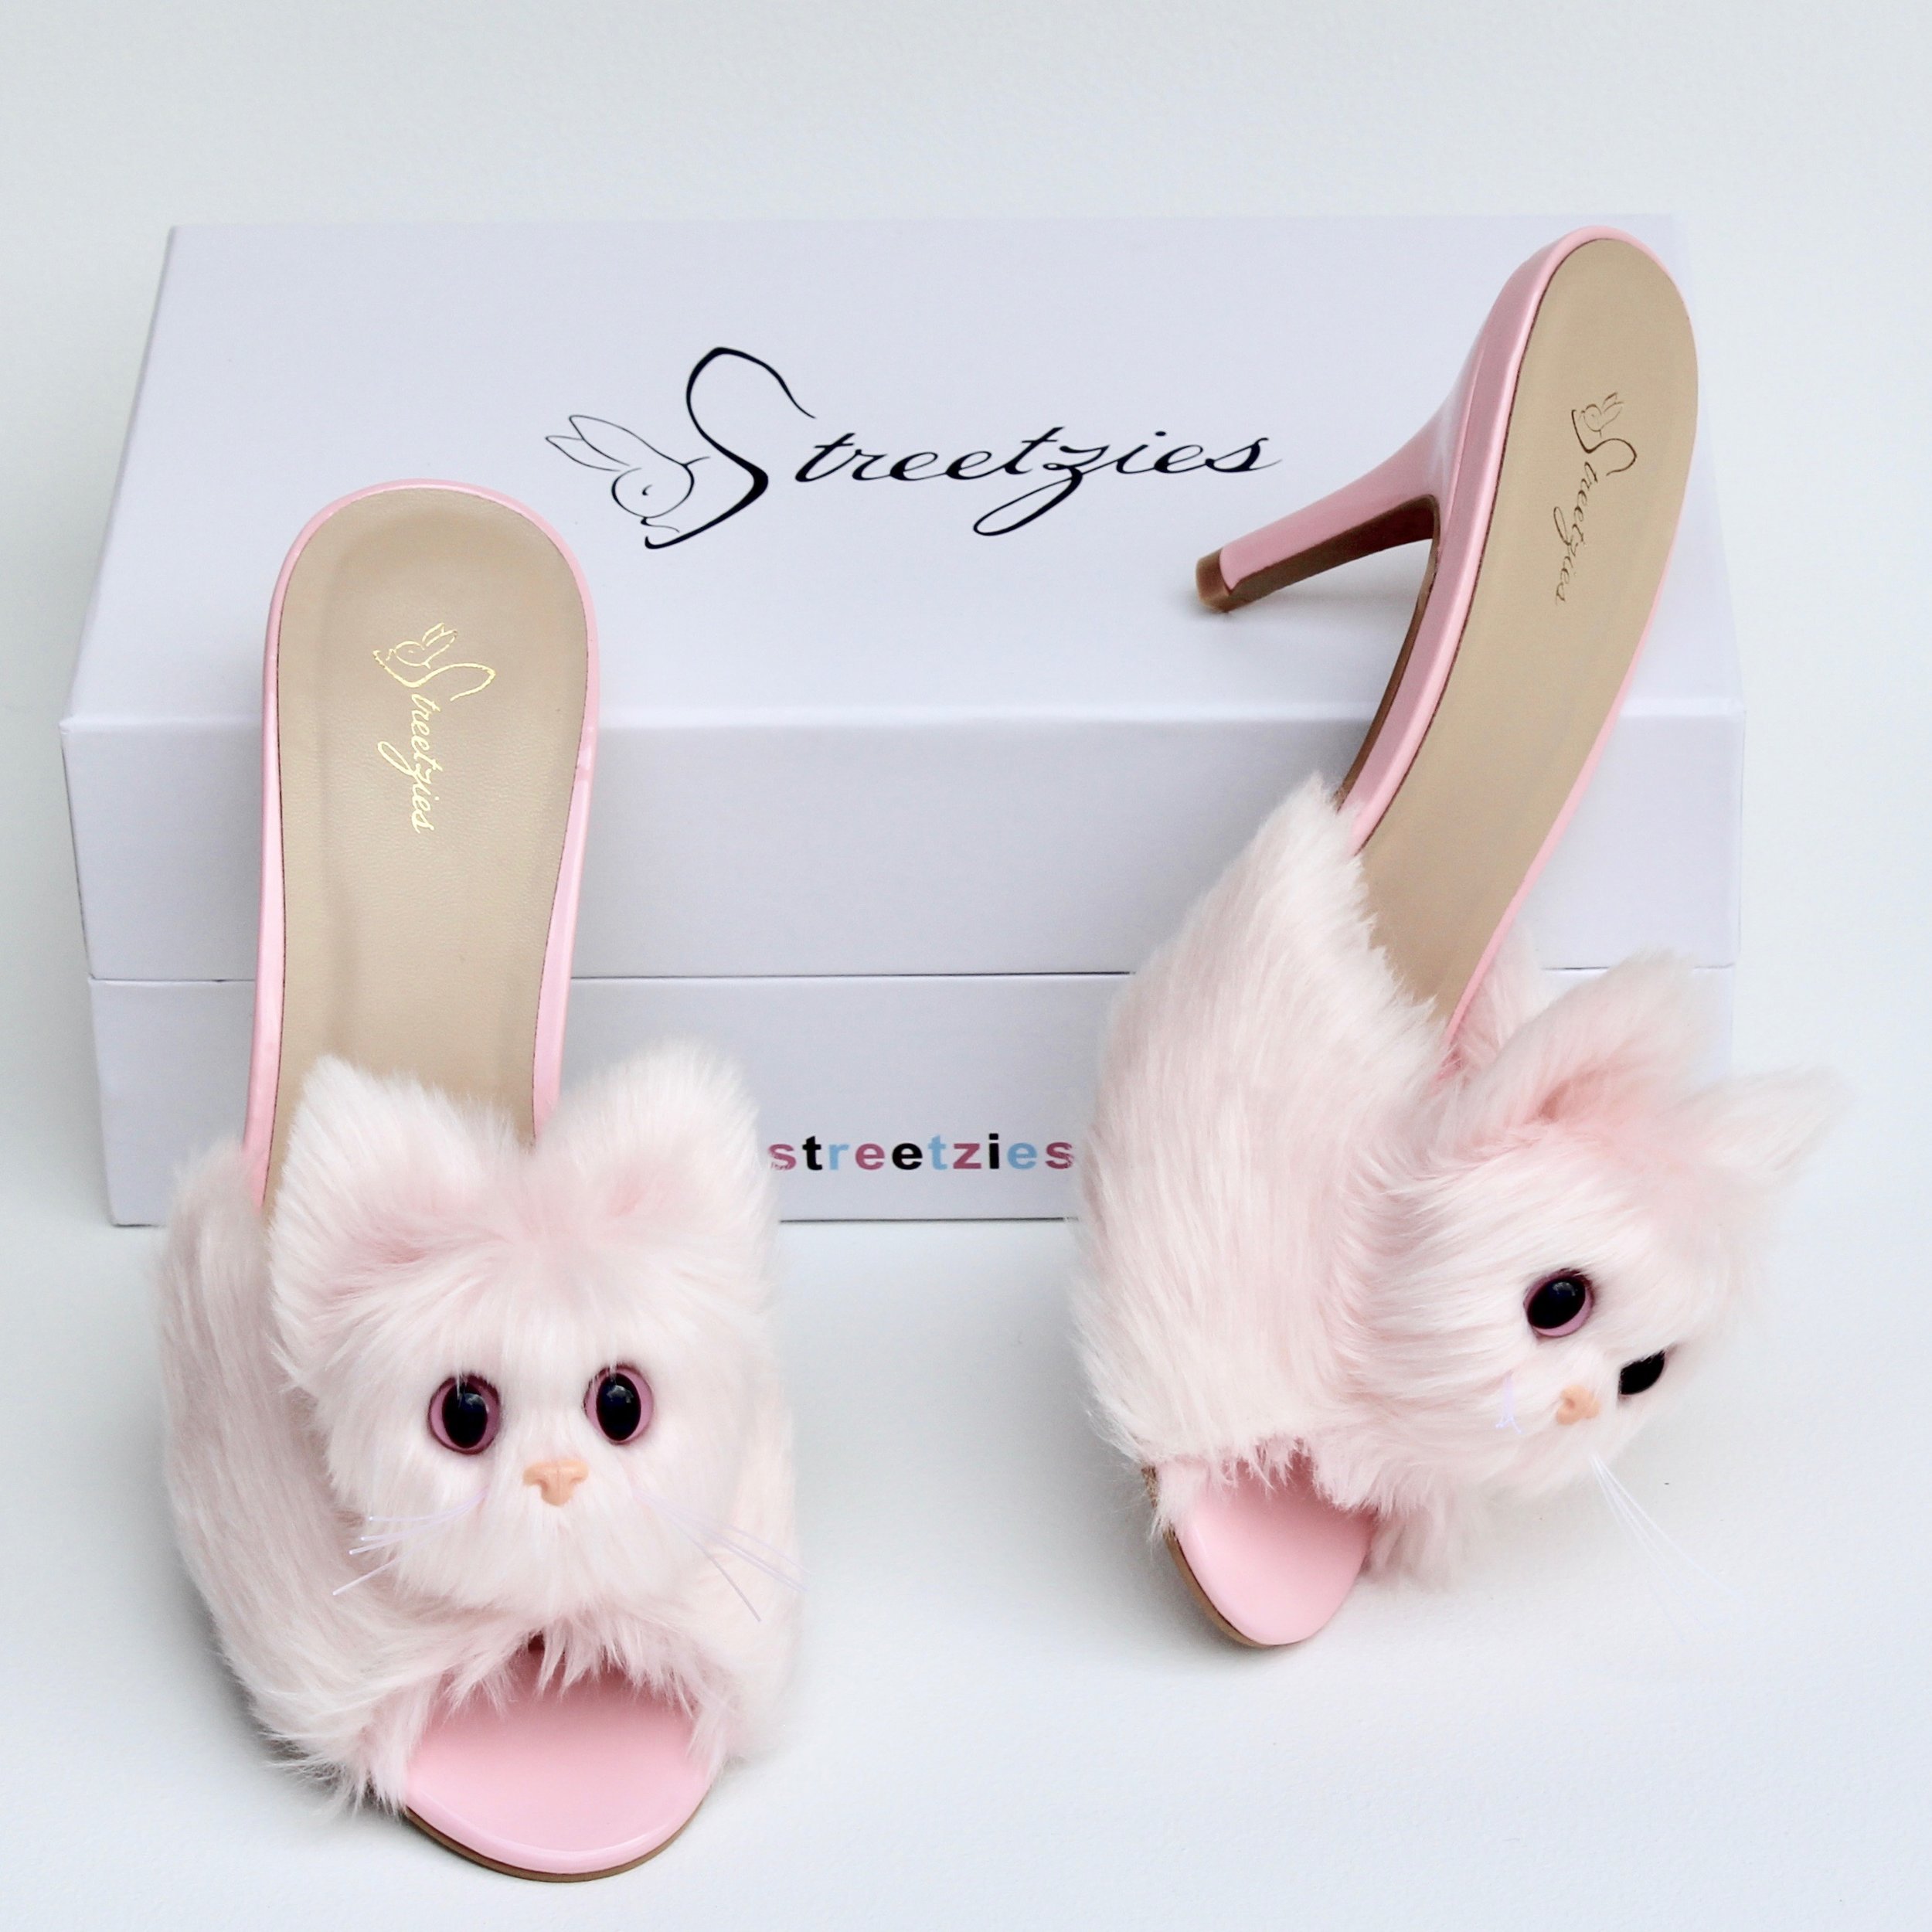 streetzies bunny slippers